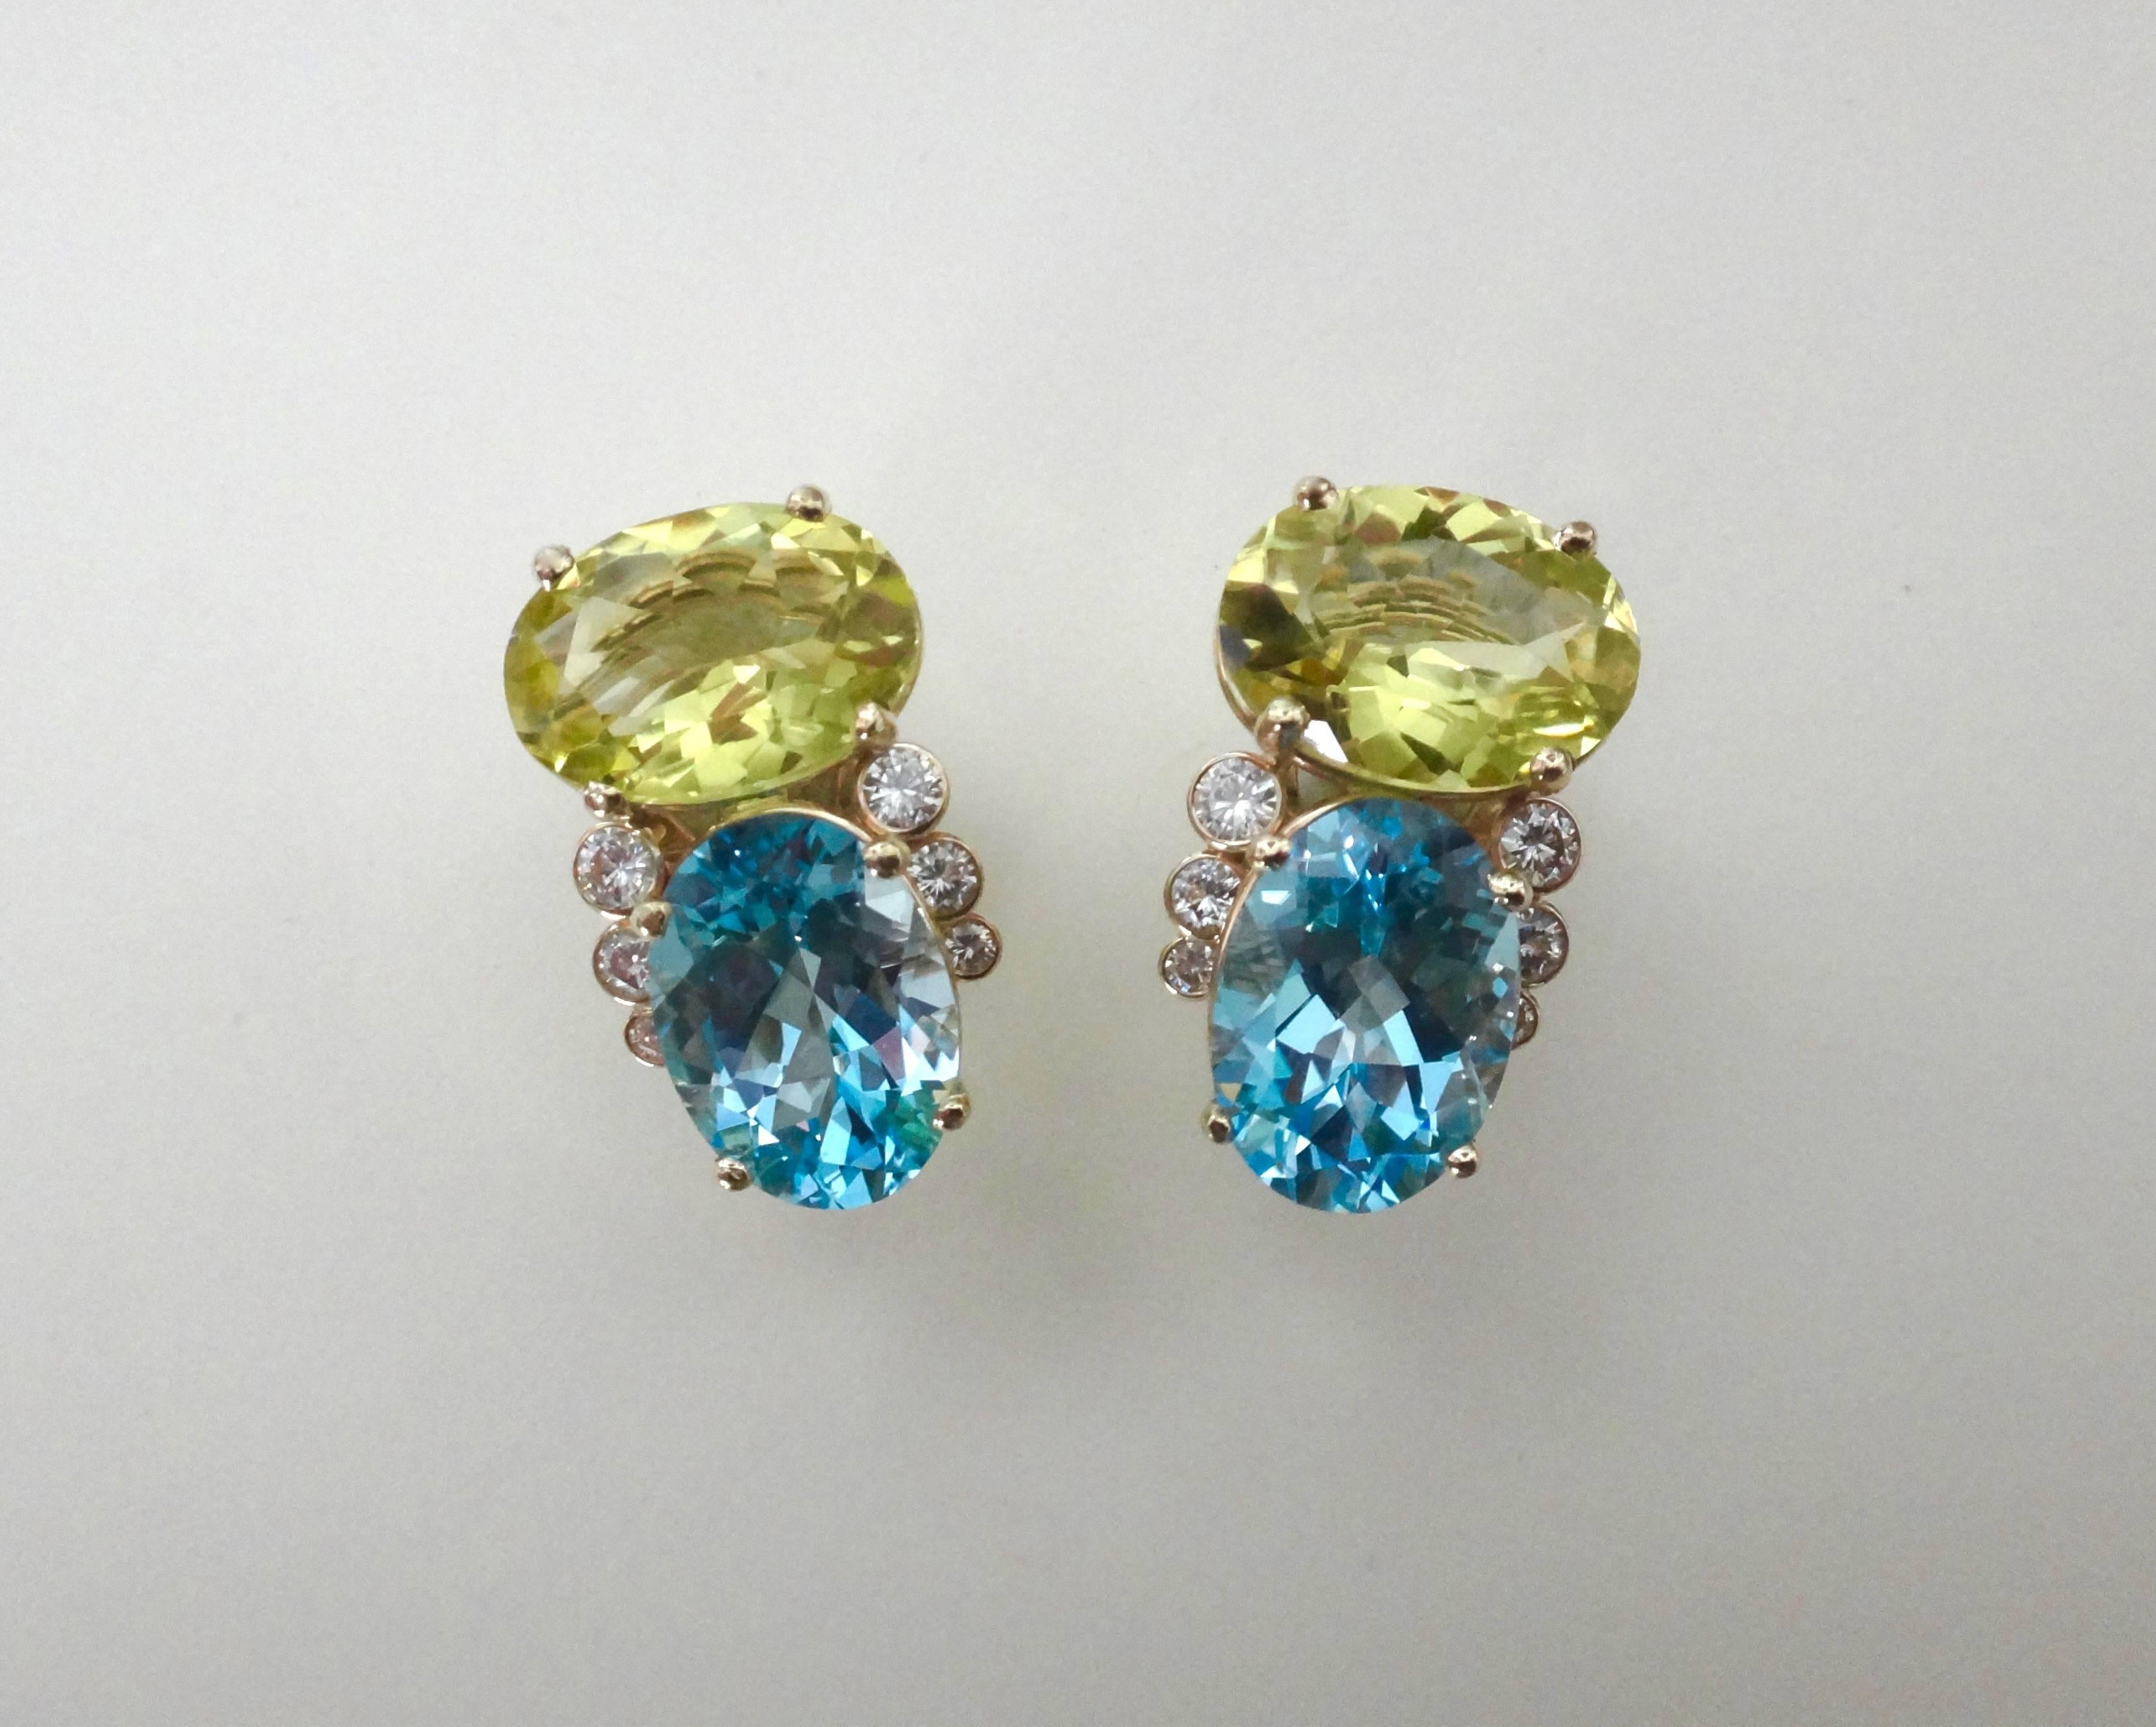 "Due Pietra" earrings consisting of oval cut lemon citrines blending harmoniously with oval cut baby blue topaz.  The prong set gems are complimented with bezel set white diamonds.  The substantial earrings have posts with omega clip backs